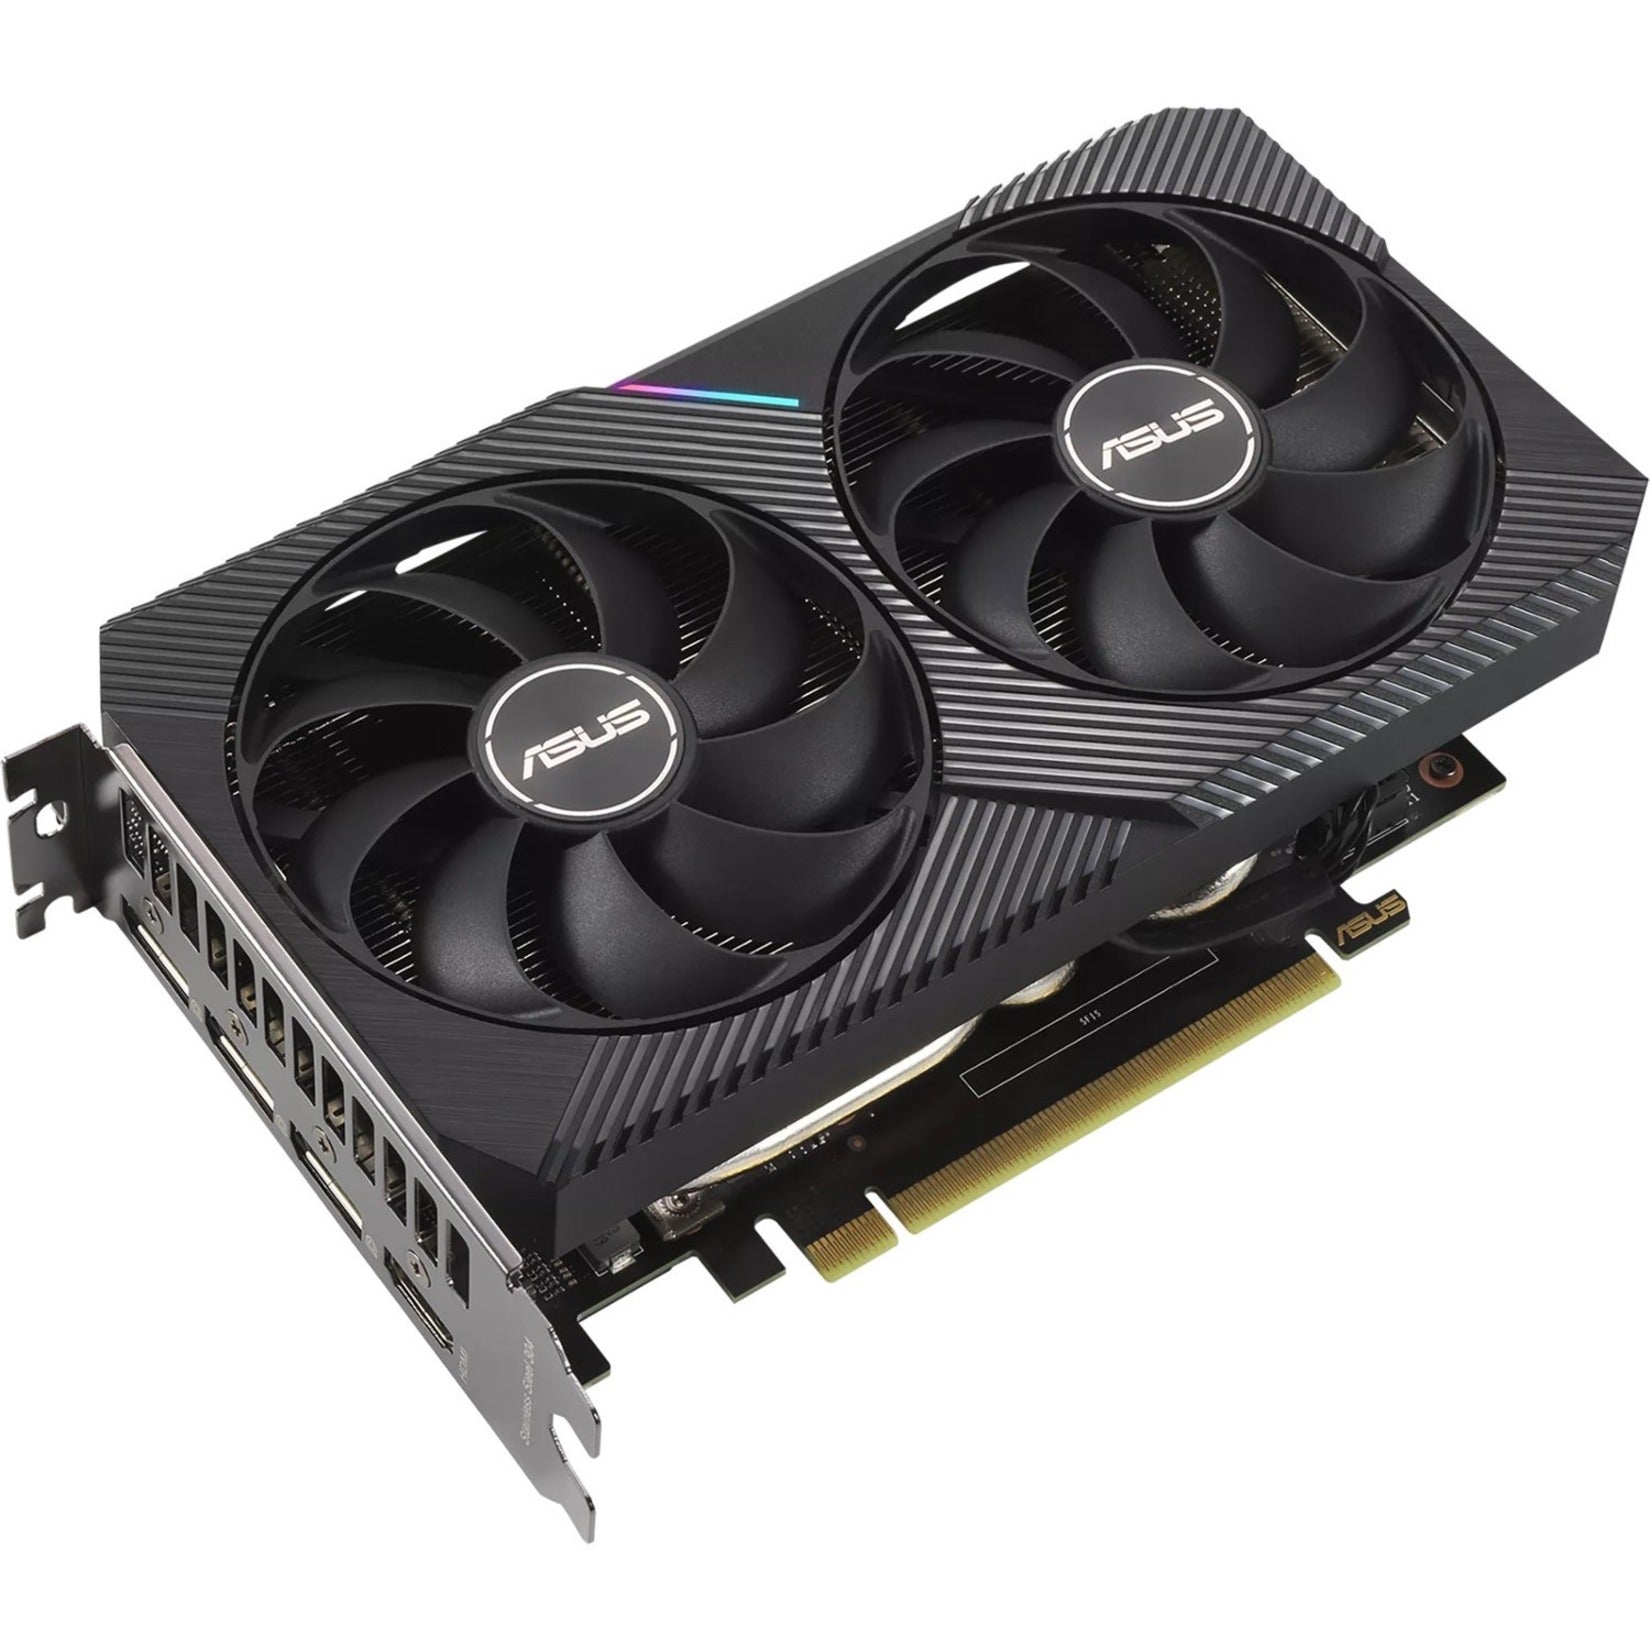 Asus DUAL-RTX3060-8G Dual GeForce RTX 3060 8GB GDDR6 Graphic Card, 4K Gaming and VR Ready